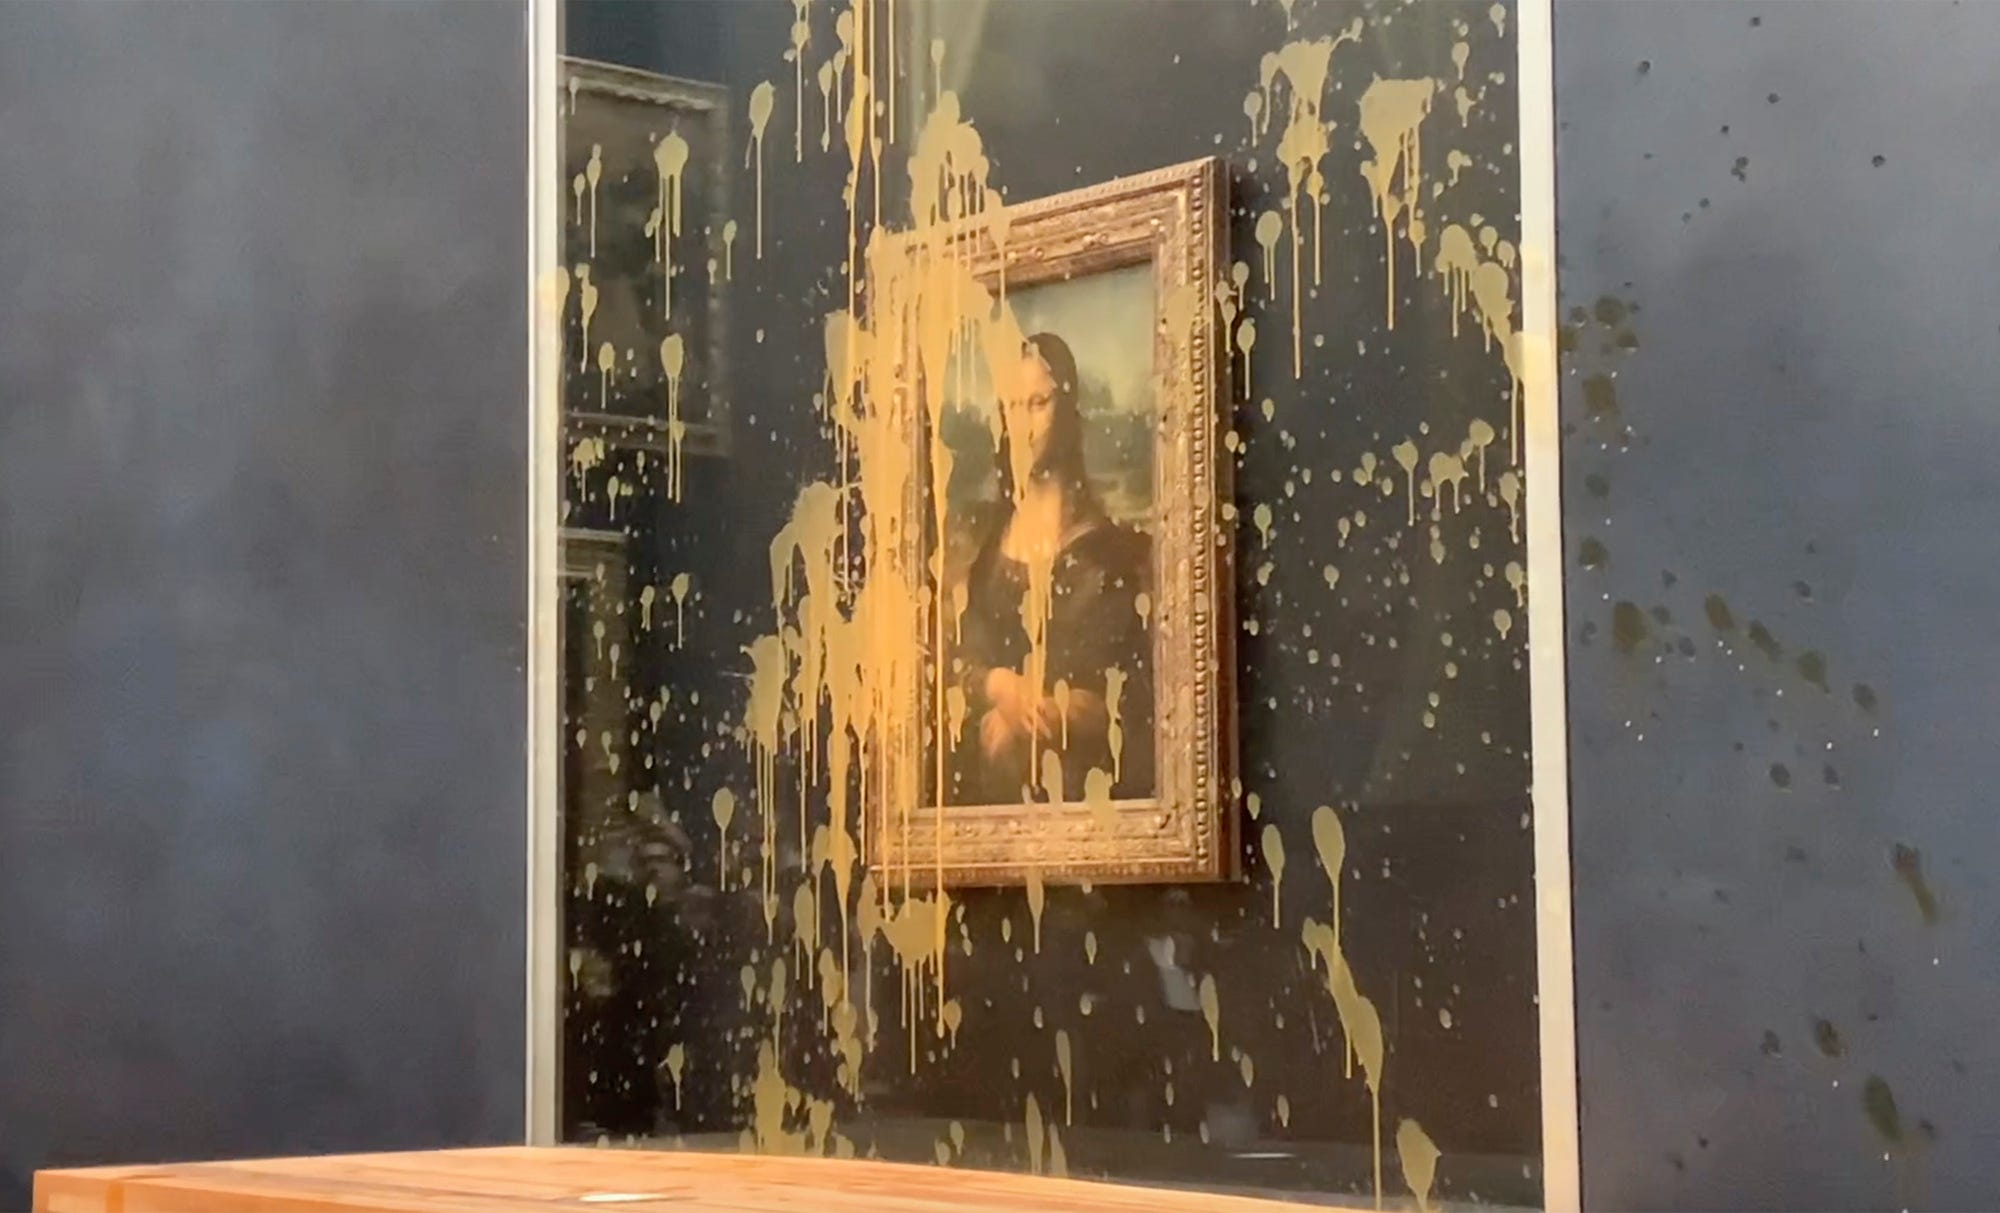 climate activists throw soup at the mona lisa in protest for farmer protections, sustainable food